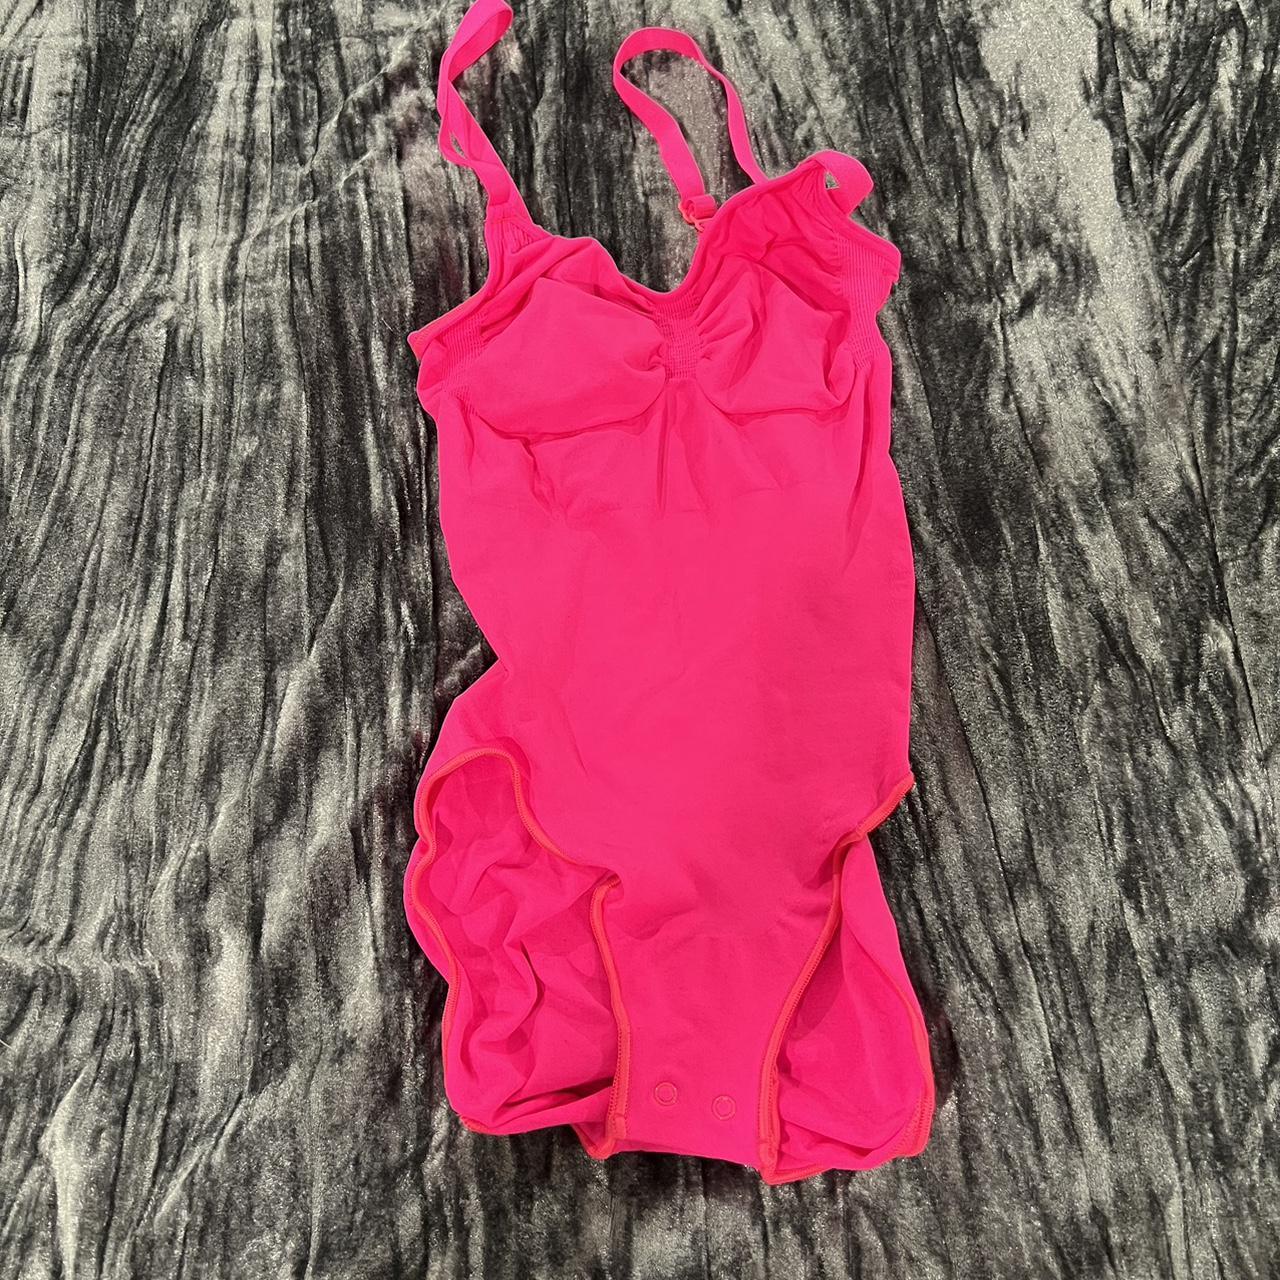 Hot pink Skims slimming body suit Perfect conditon. - Depop